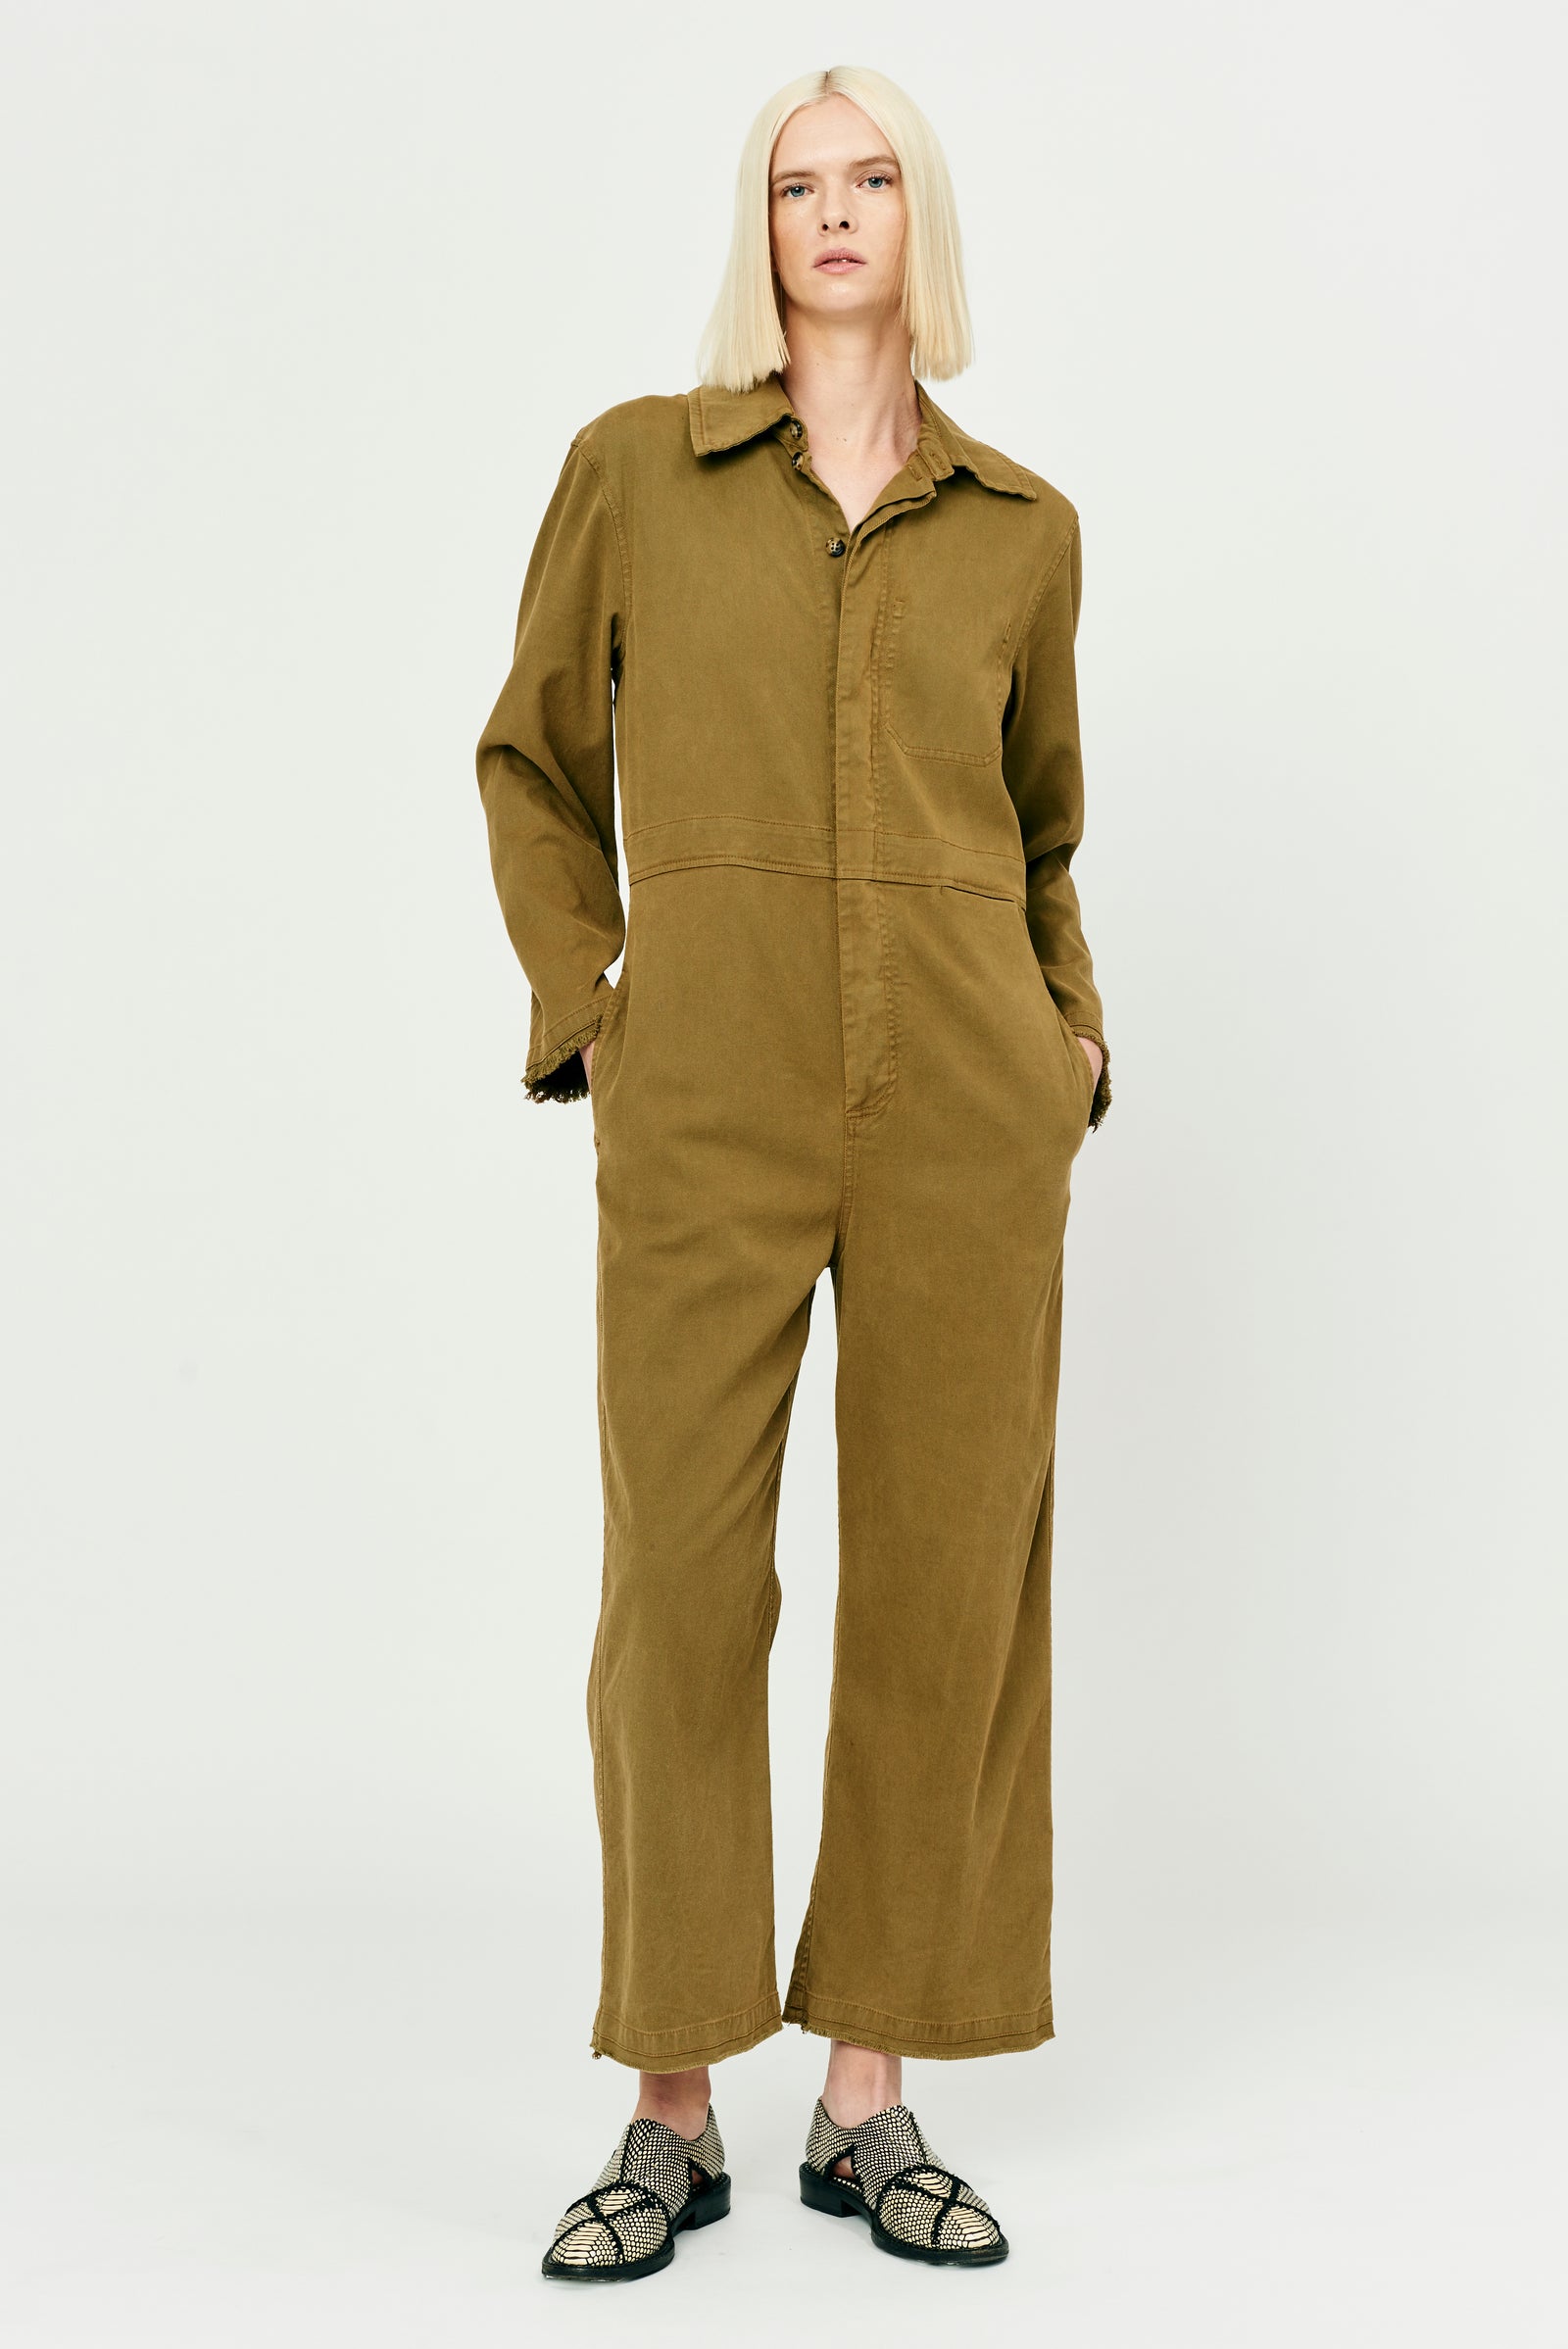 Tobacco Rancho Work Wear Union Suit Full Front View